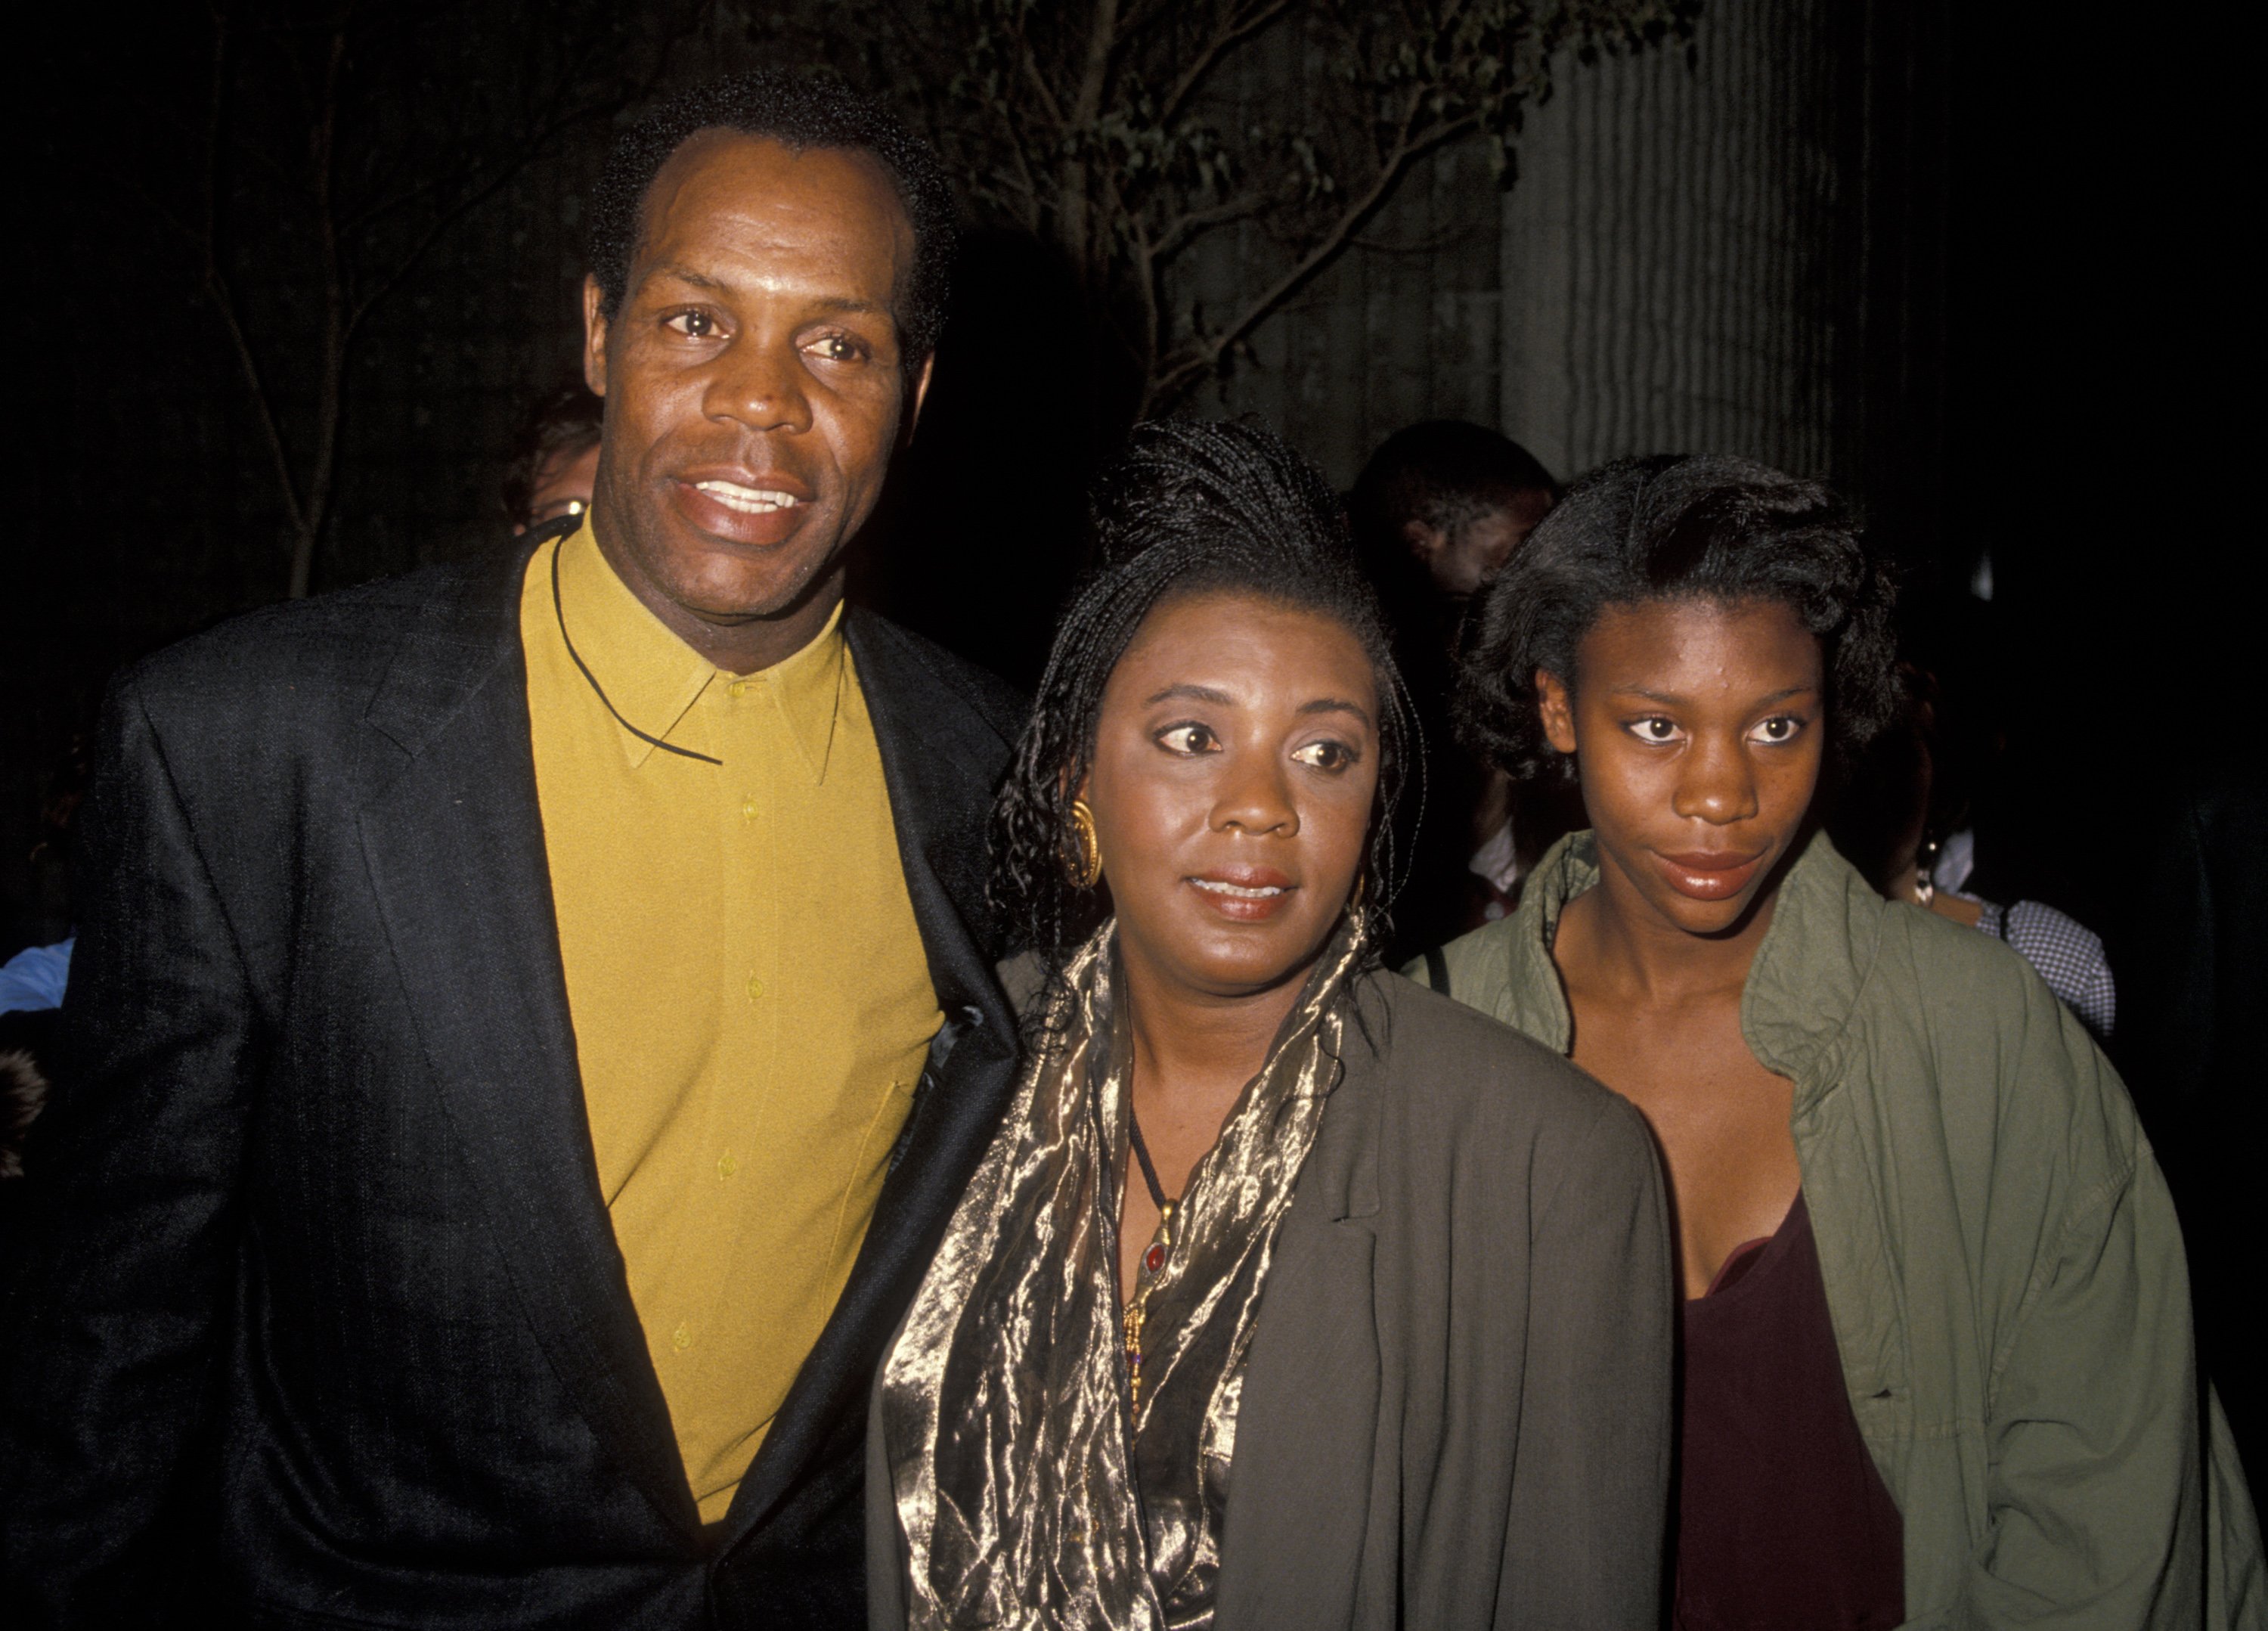 Danny Glover, Asake Bomani, and Mandisa Glover at the premiere of "Predator 2" on November 19, 1990, in Westwood, California. | Source: Ron Galella, Ltd./Ron Galella Collection/Getty Images